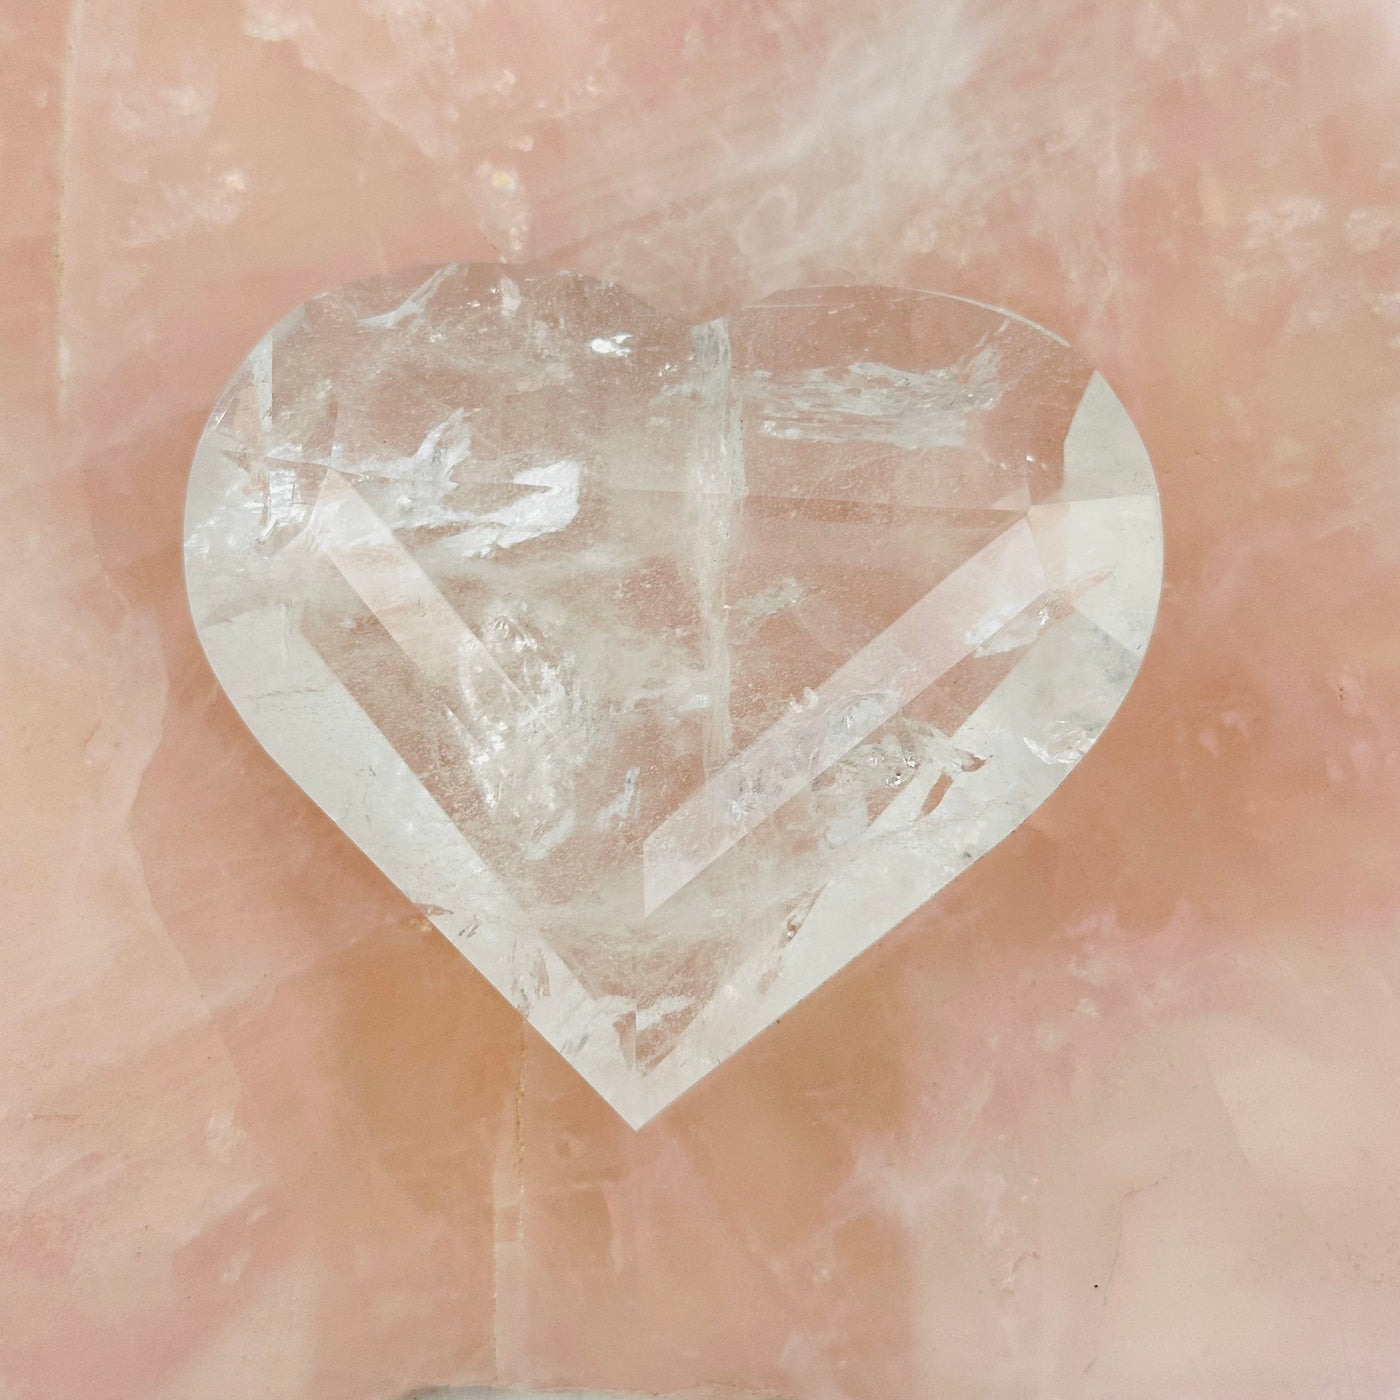 Faceted Crystal Quartz Heart displayed as home decor